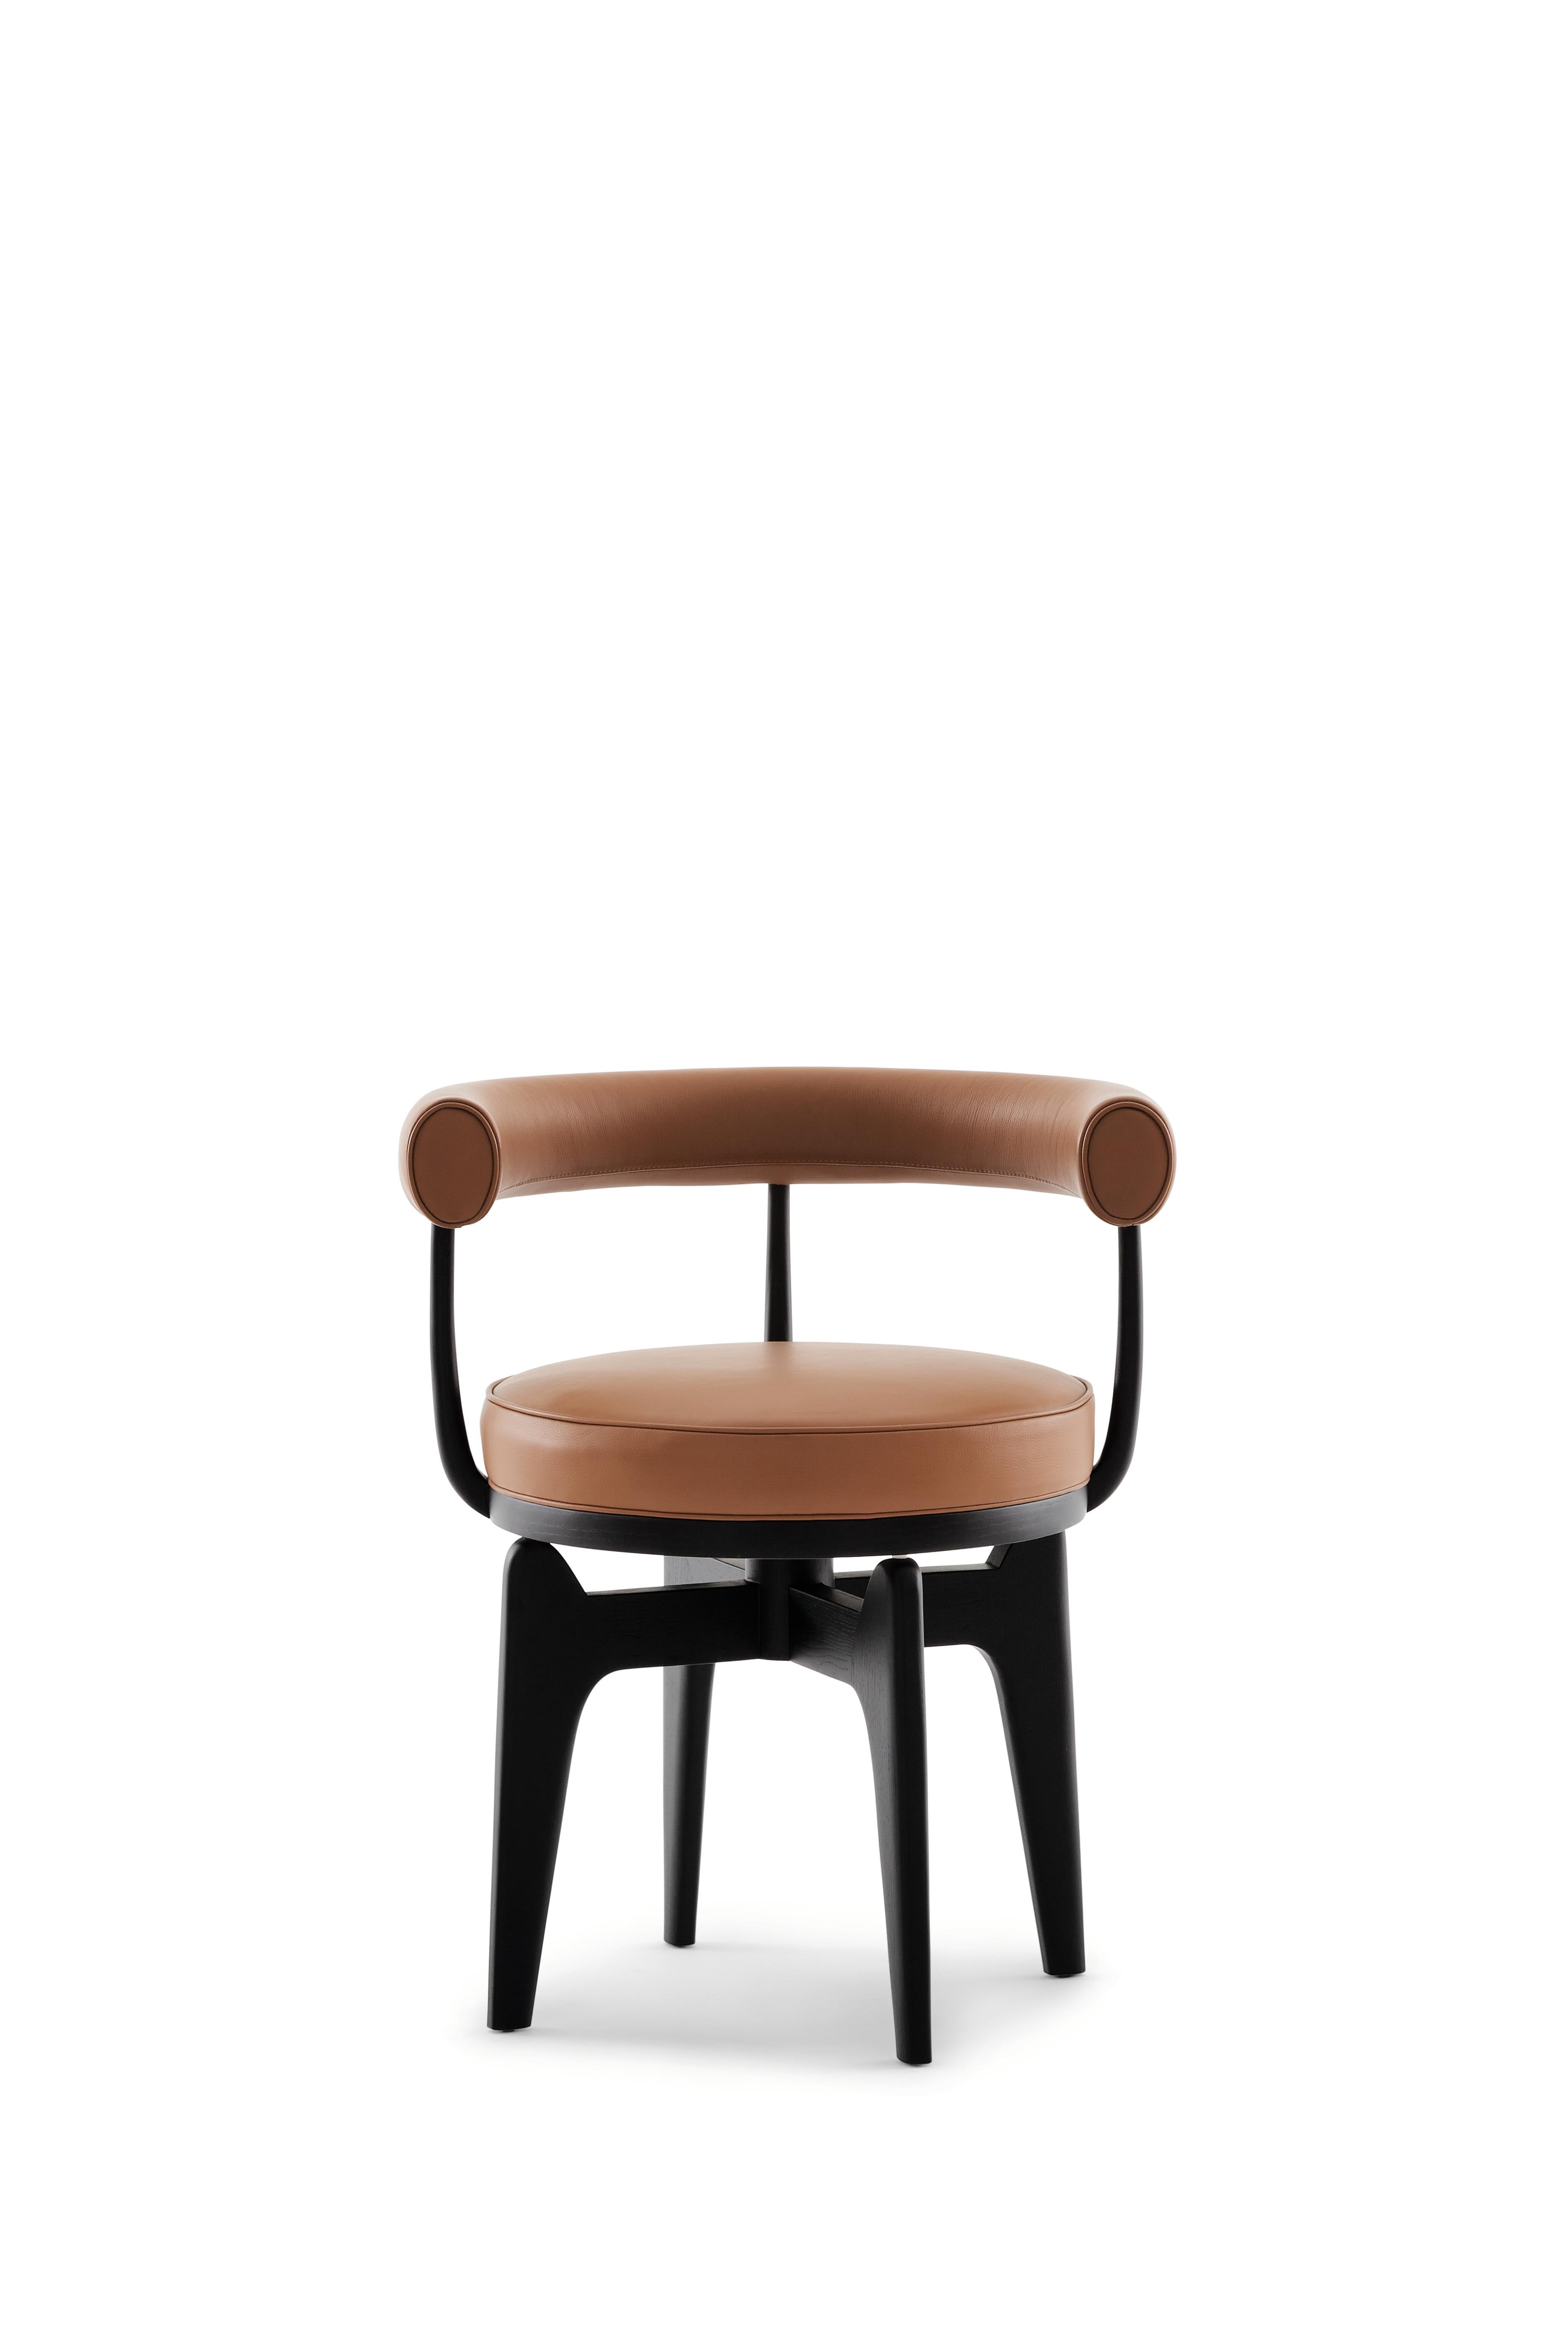 Spanish Charlotte Perriand Indochine Armchair For Sale